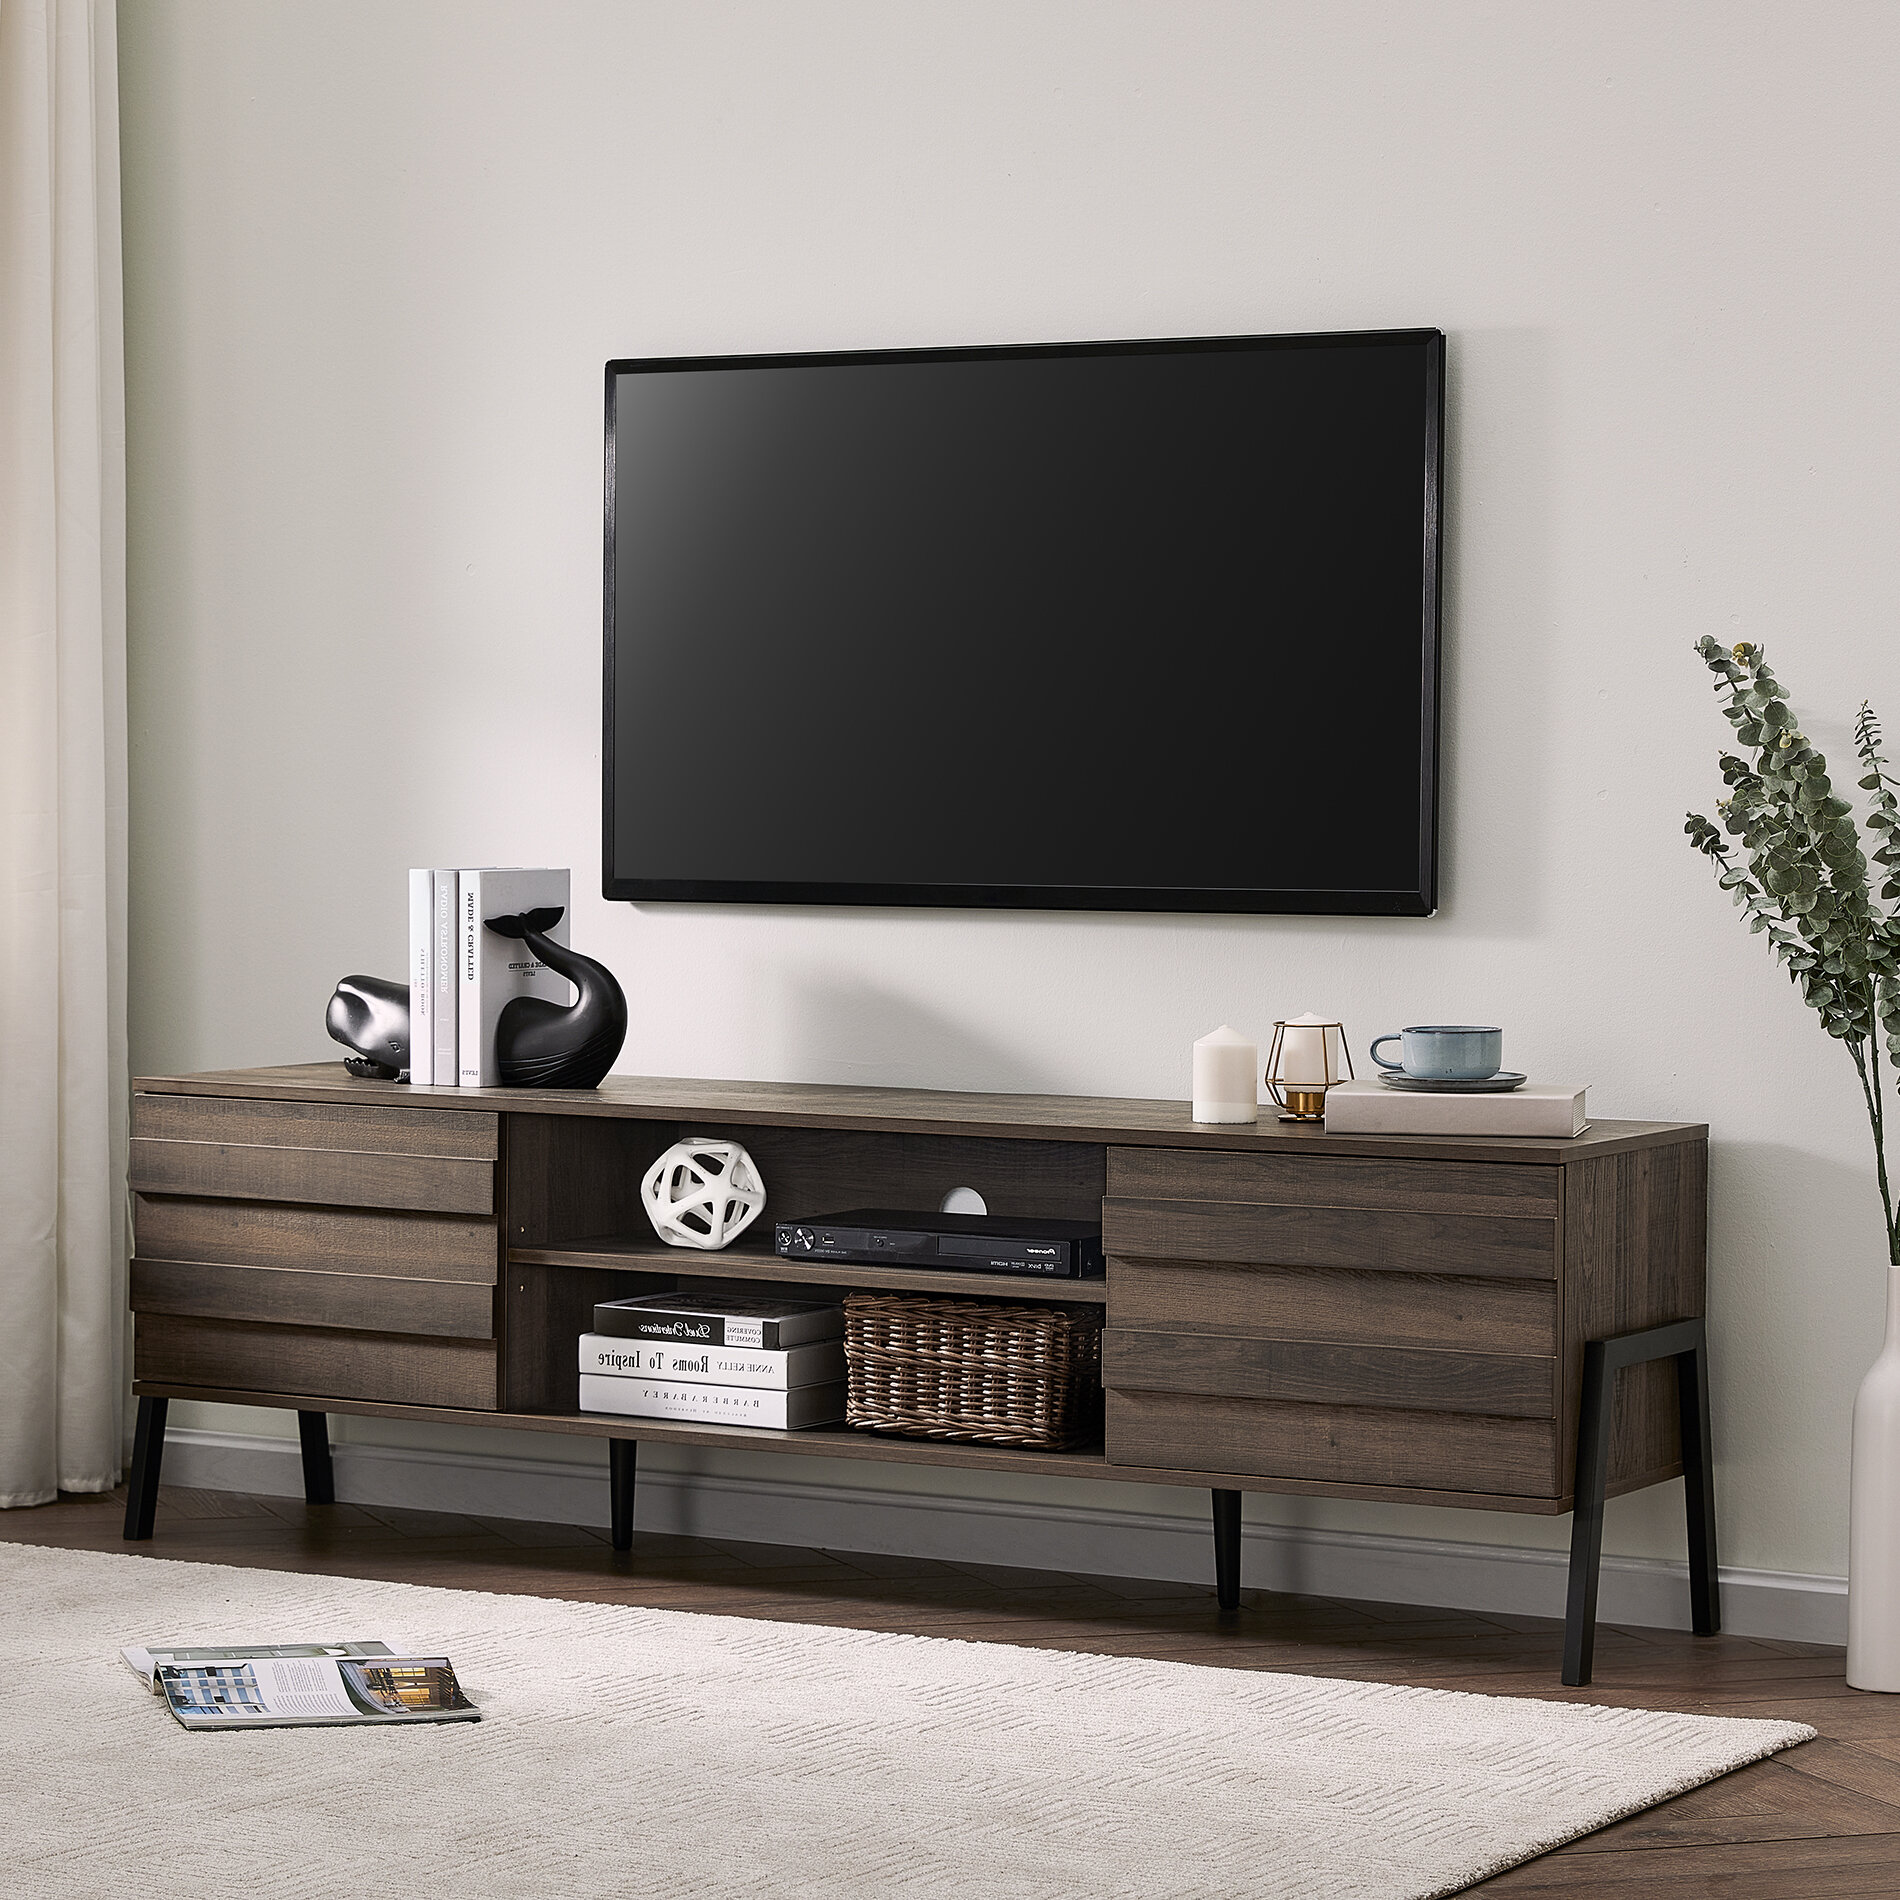 Espresso WE Furniture Minimal Farmhouse Wood Stand for TVs up to 78 Living Room Storage 